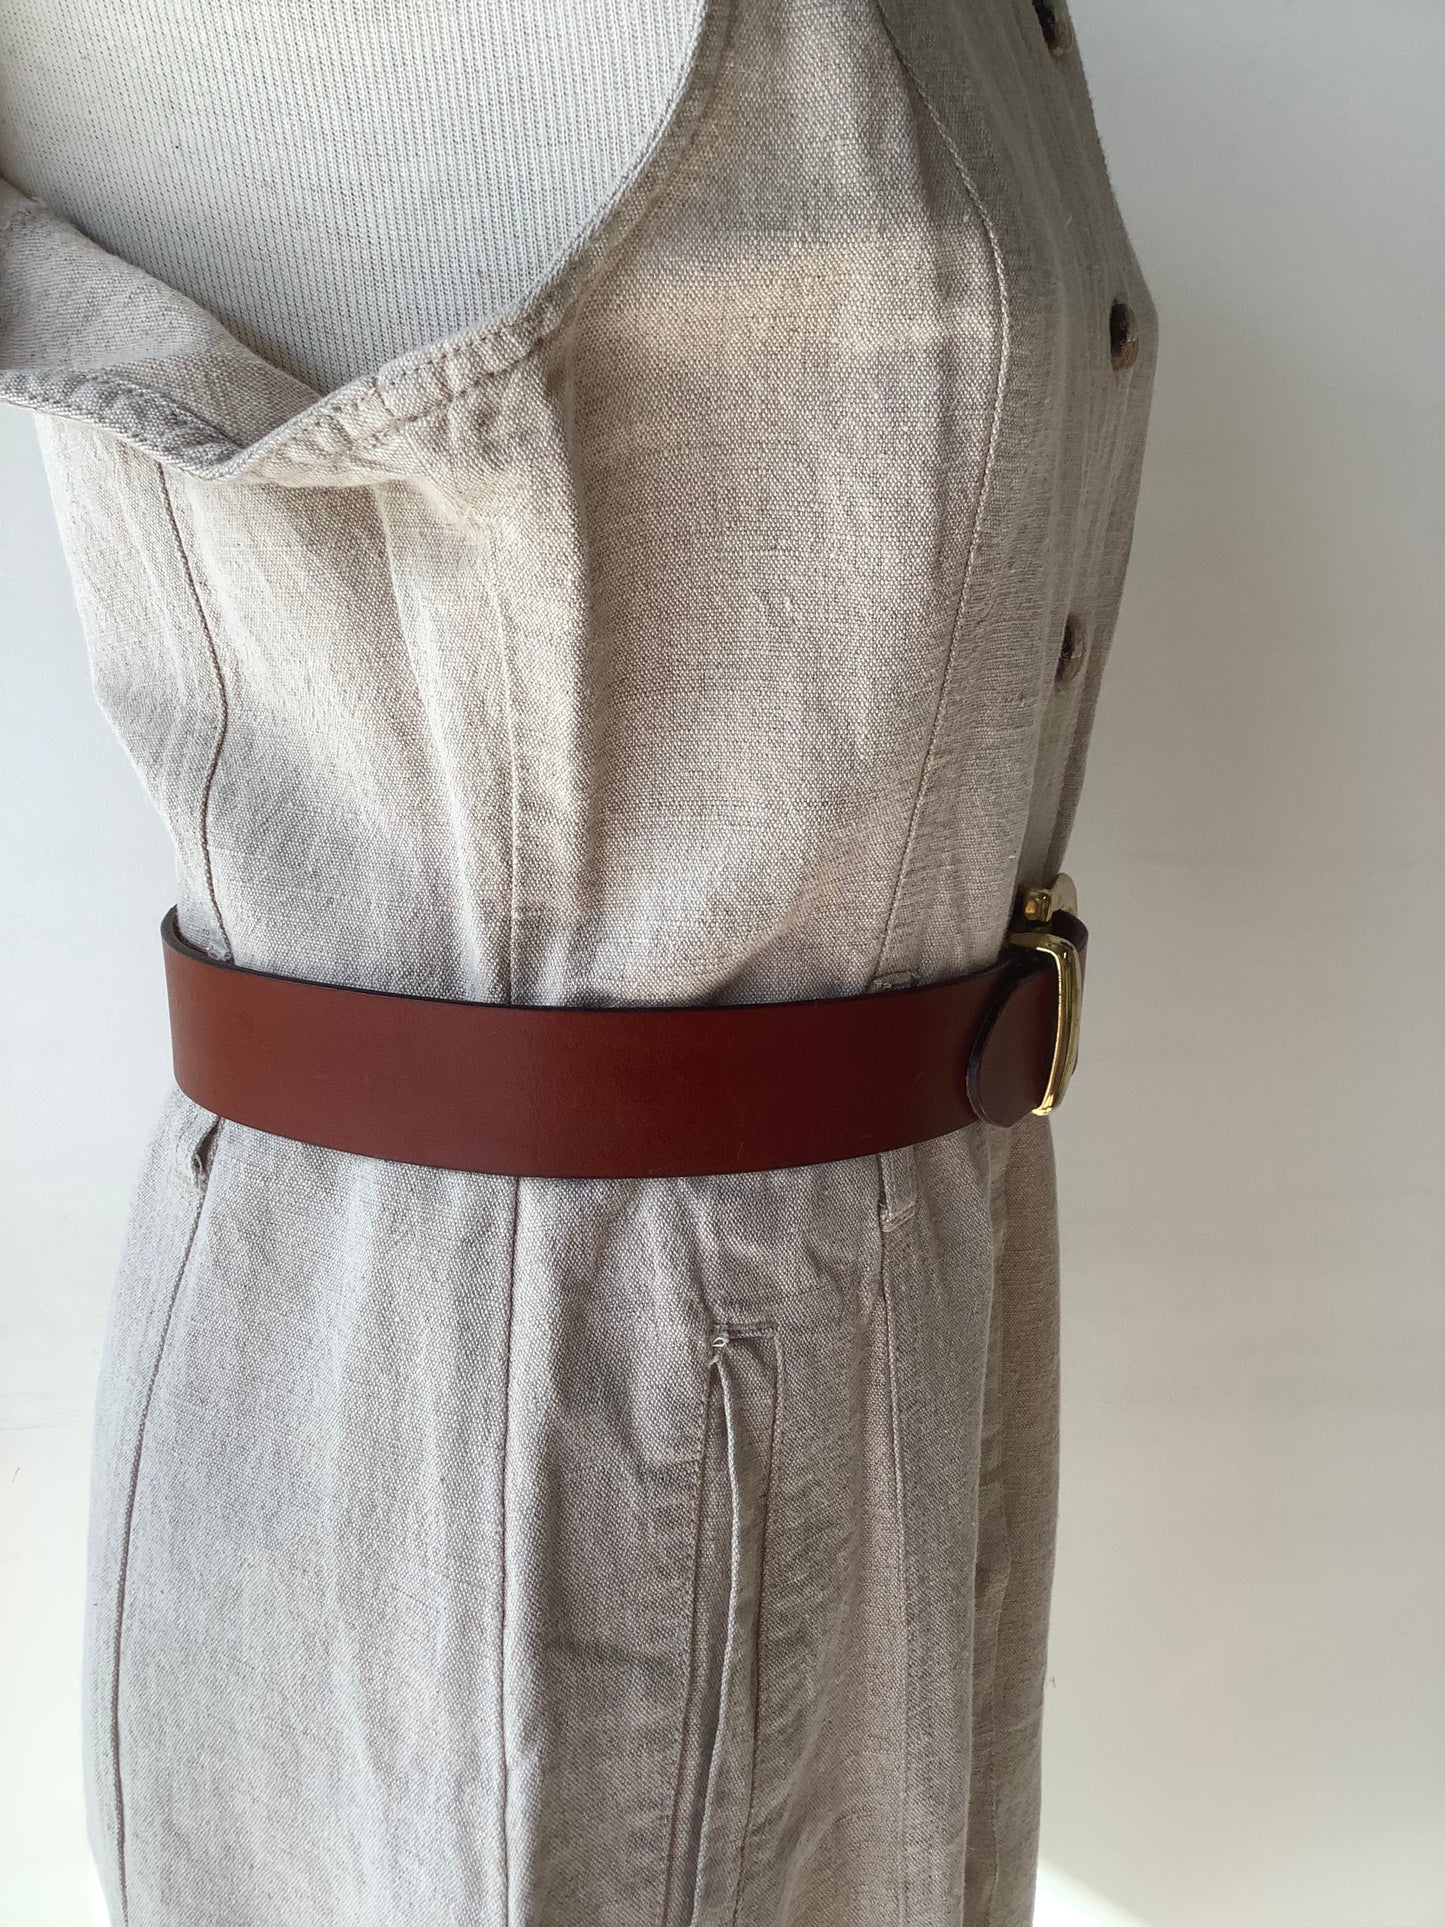 Brown leather belt with gold buckle